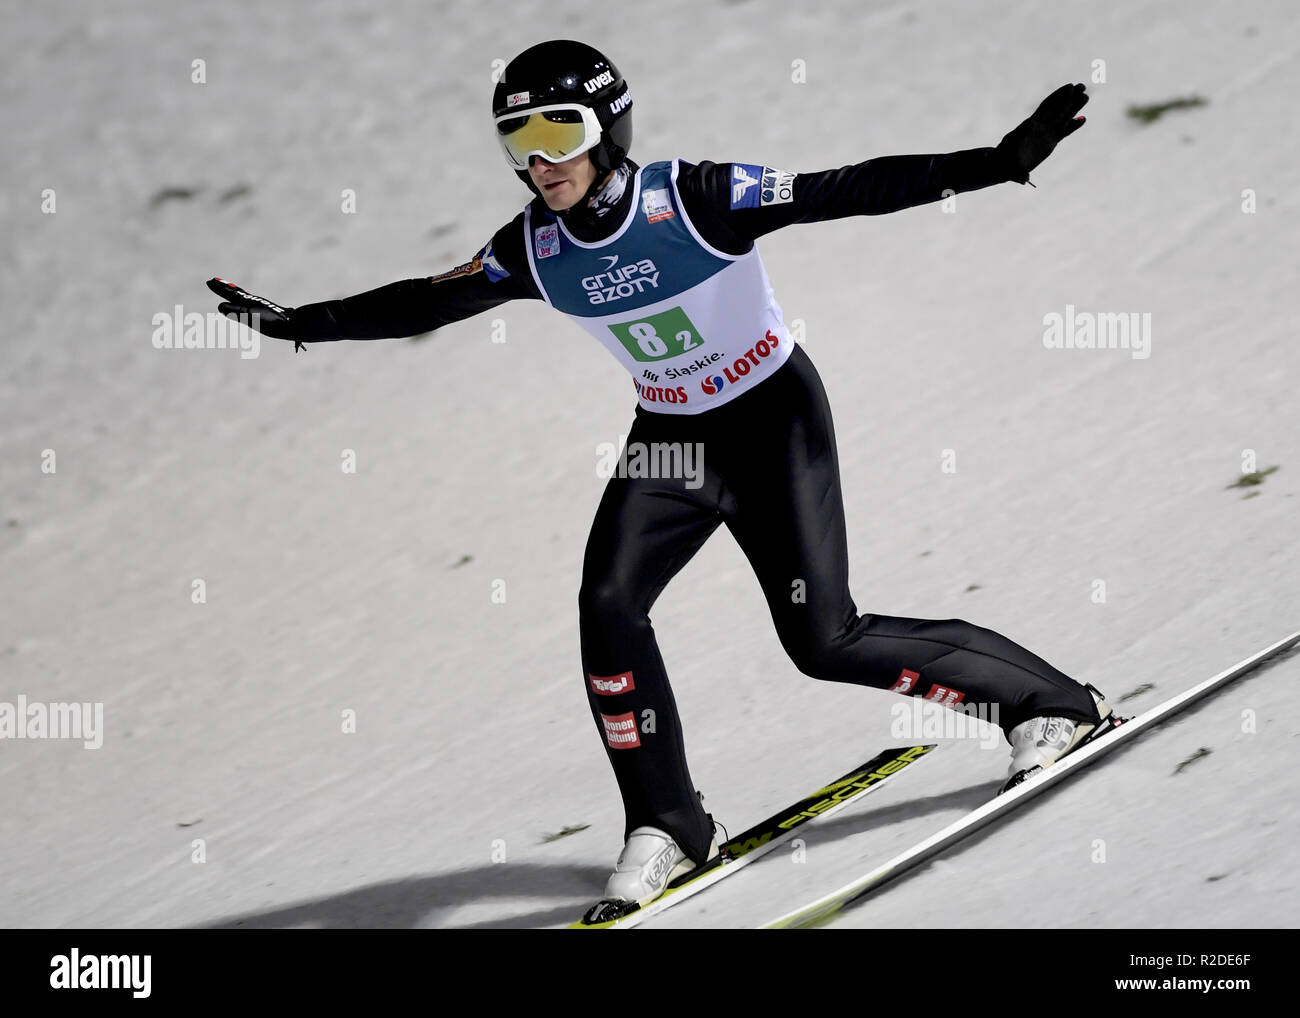 Clemens Aigner  World Cup FIS Ski Jumping on November 17, 2018 in Wisla, Poland. Stock Photo